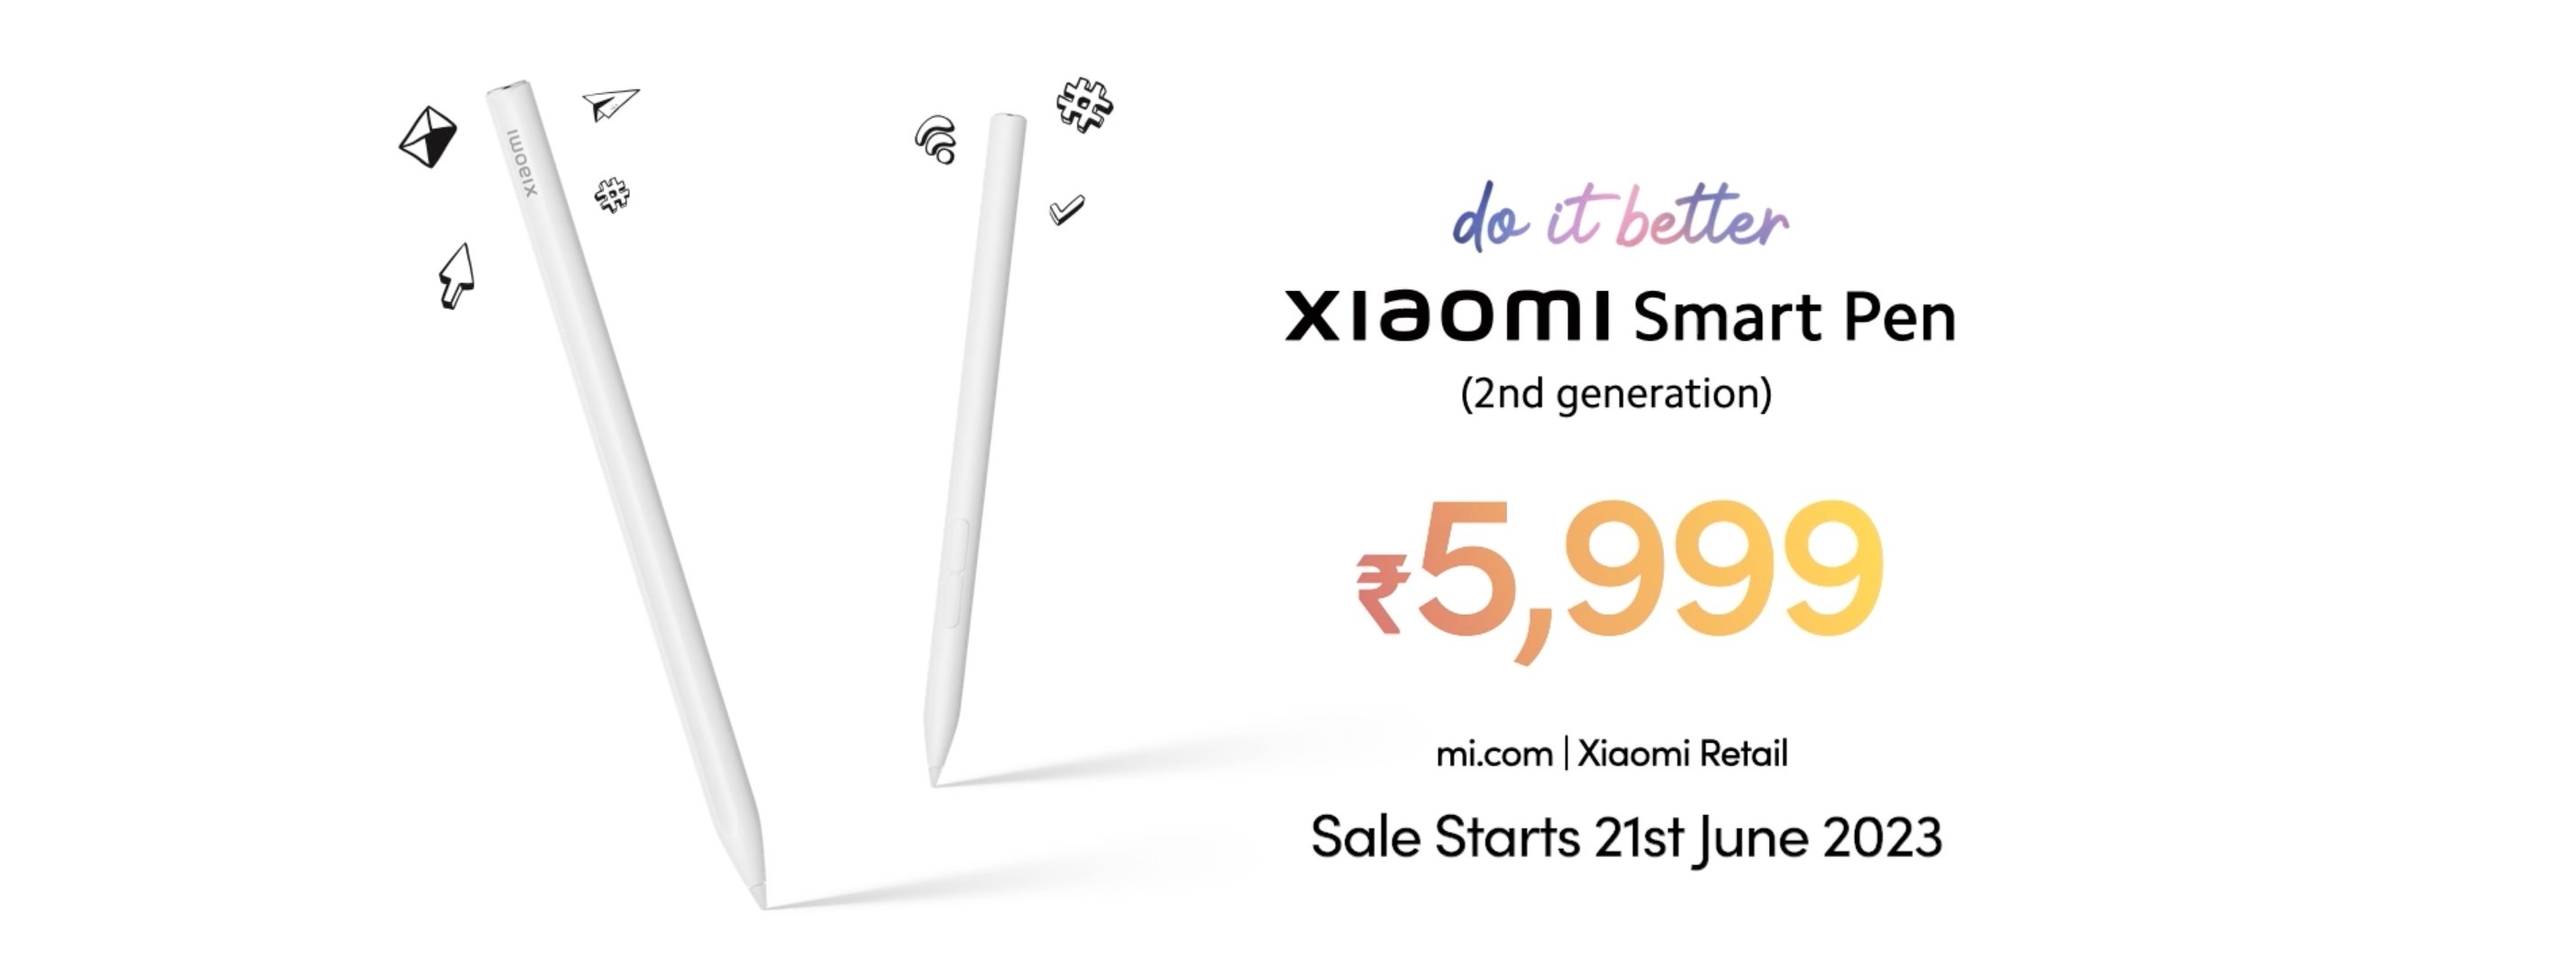 Xiaomi India on X: Ignite your imagination with the #XiaomiPad6